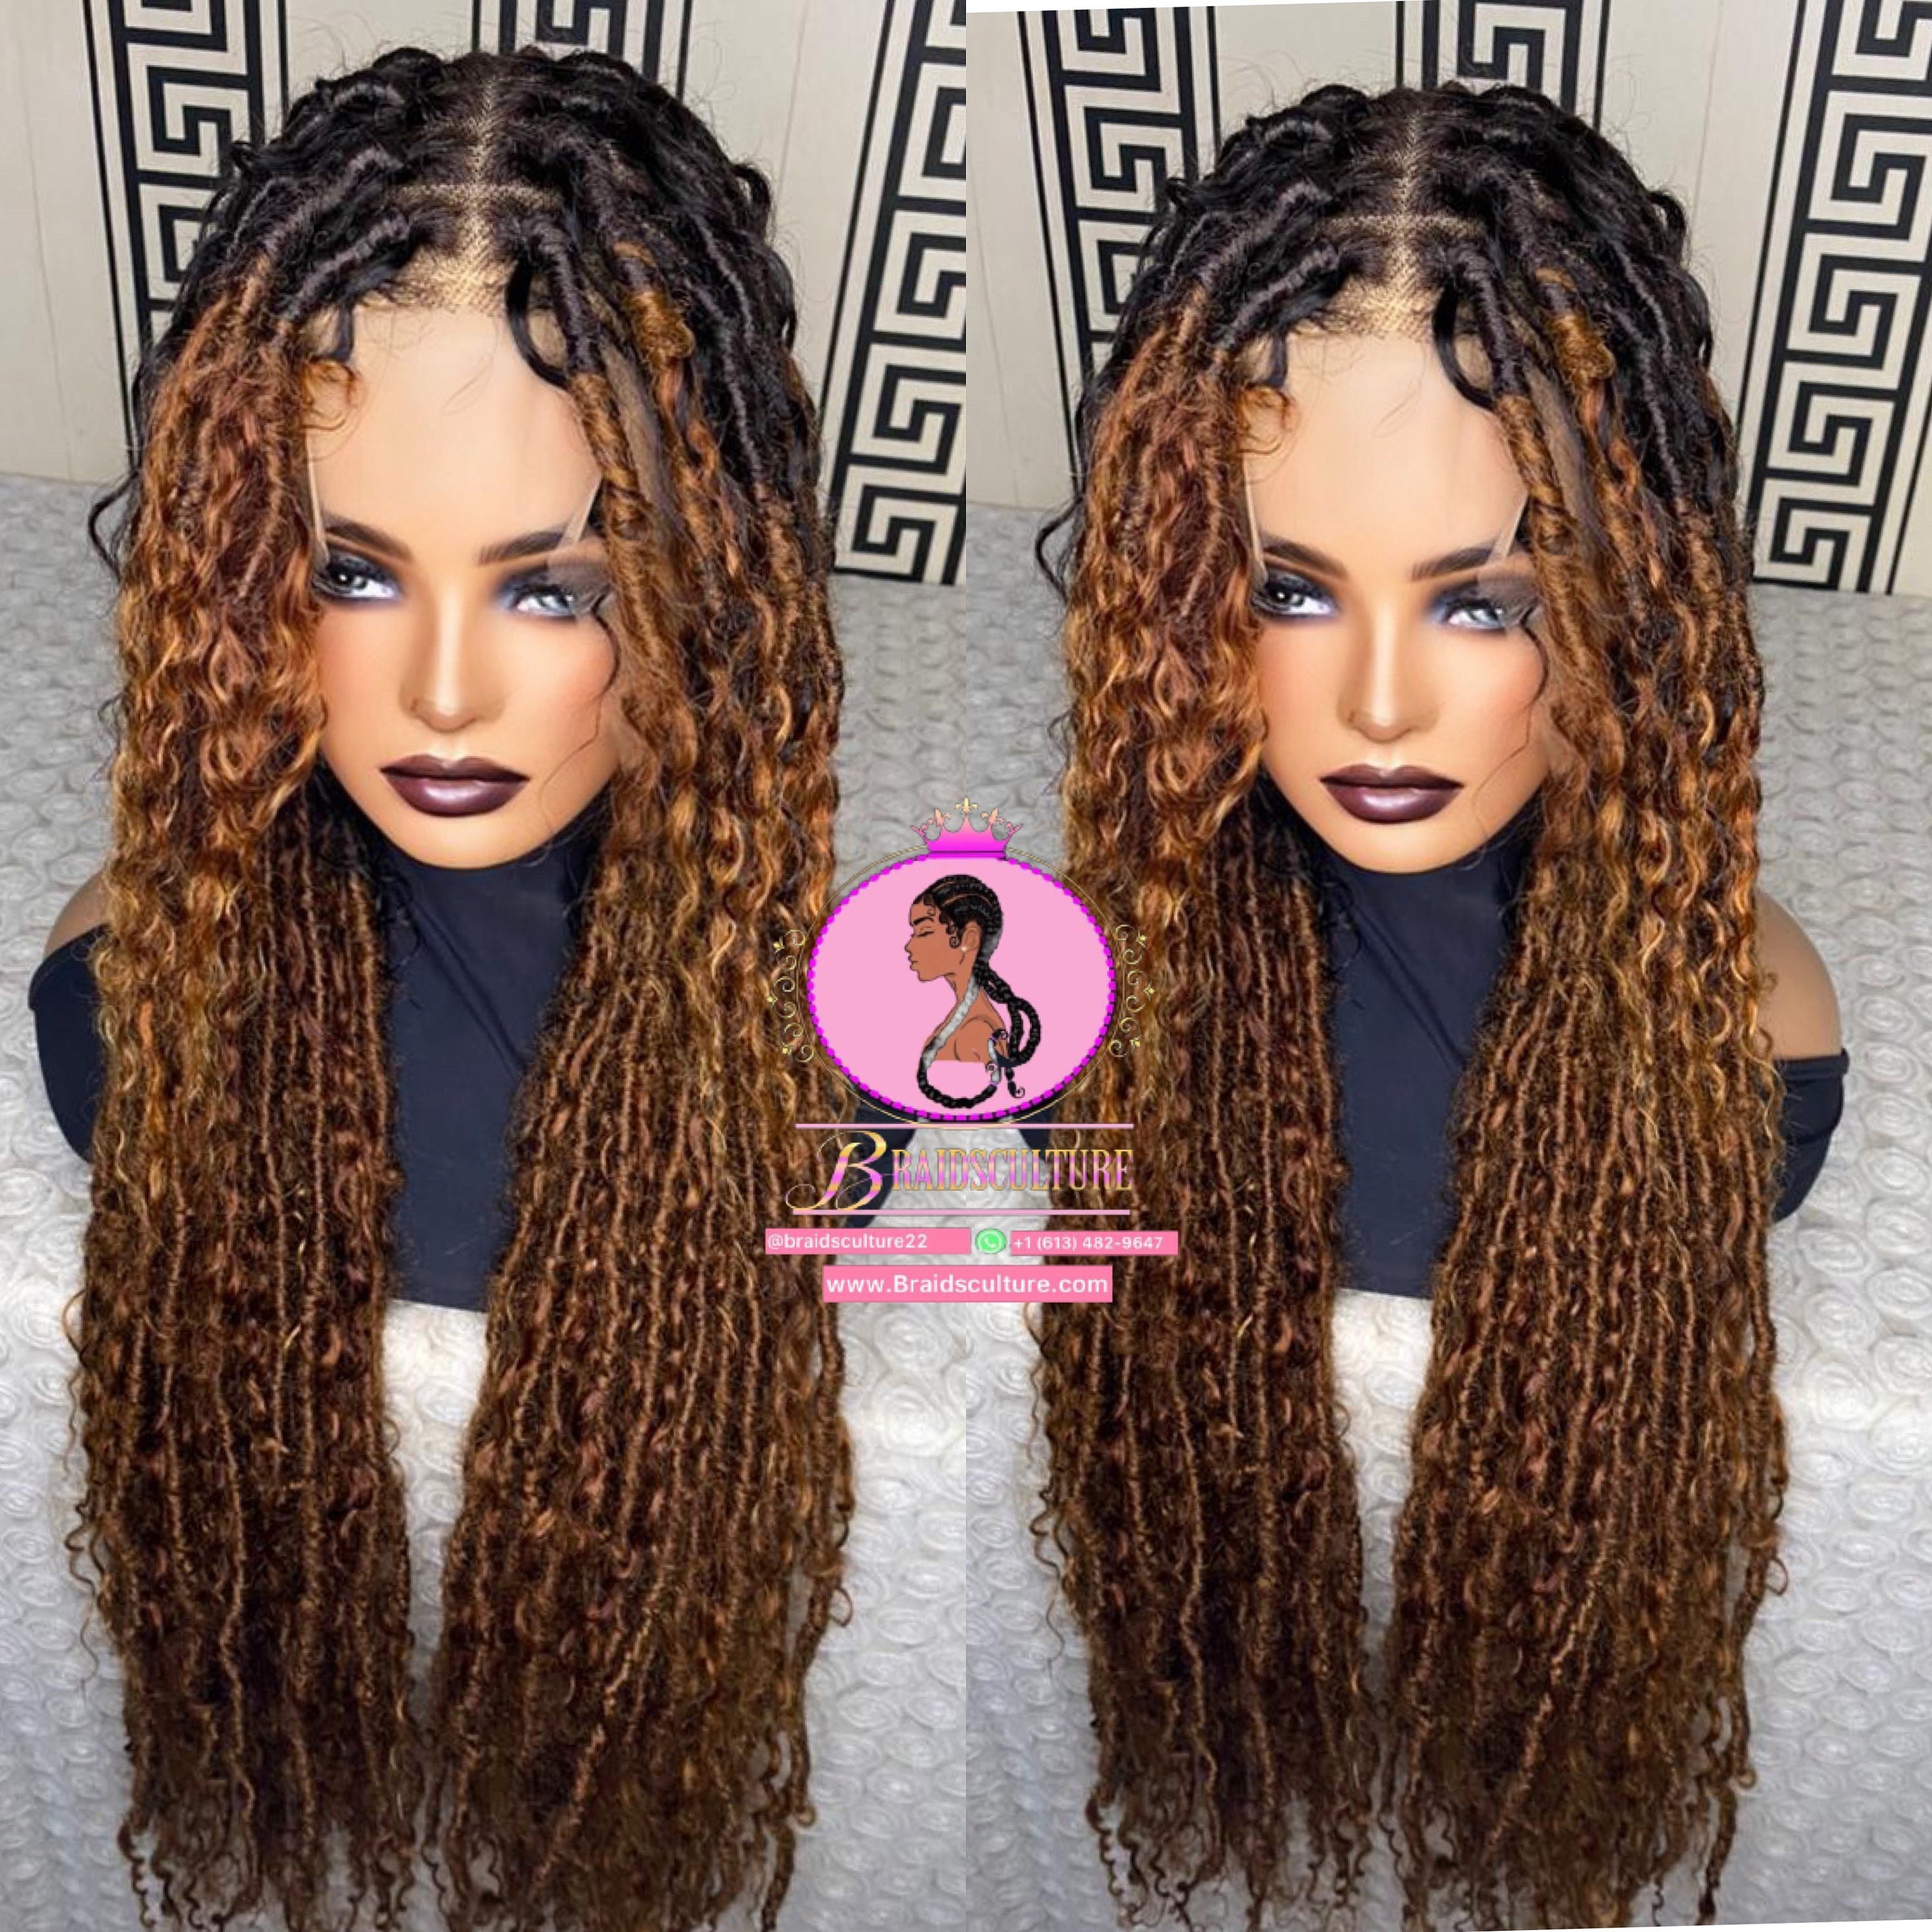 Crochet Needle for Dreadlocks or Loc Extensions - Hair by Sisi